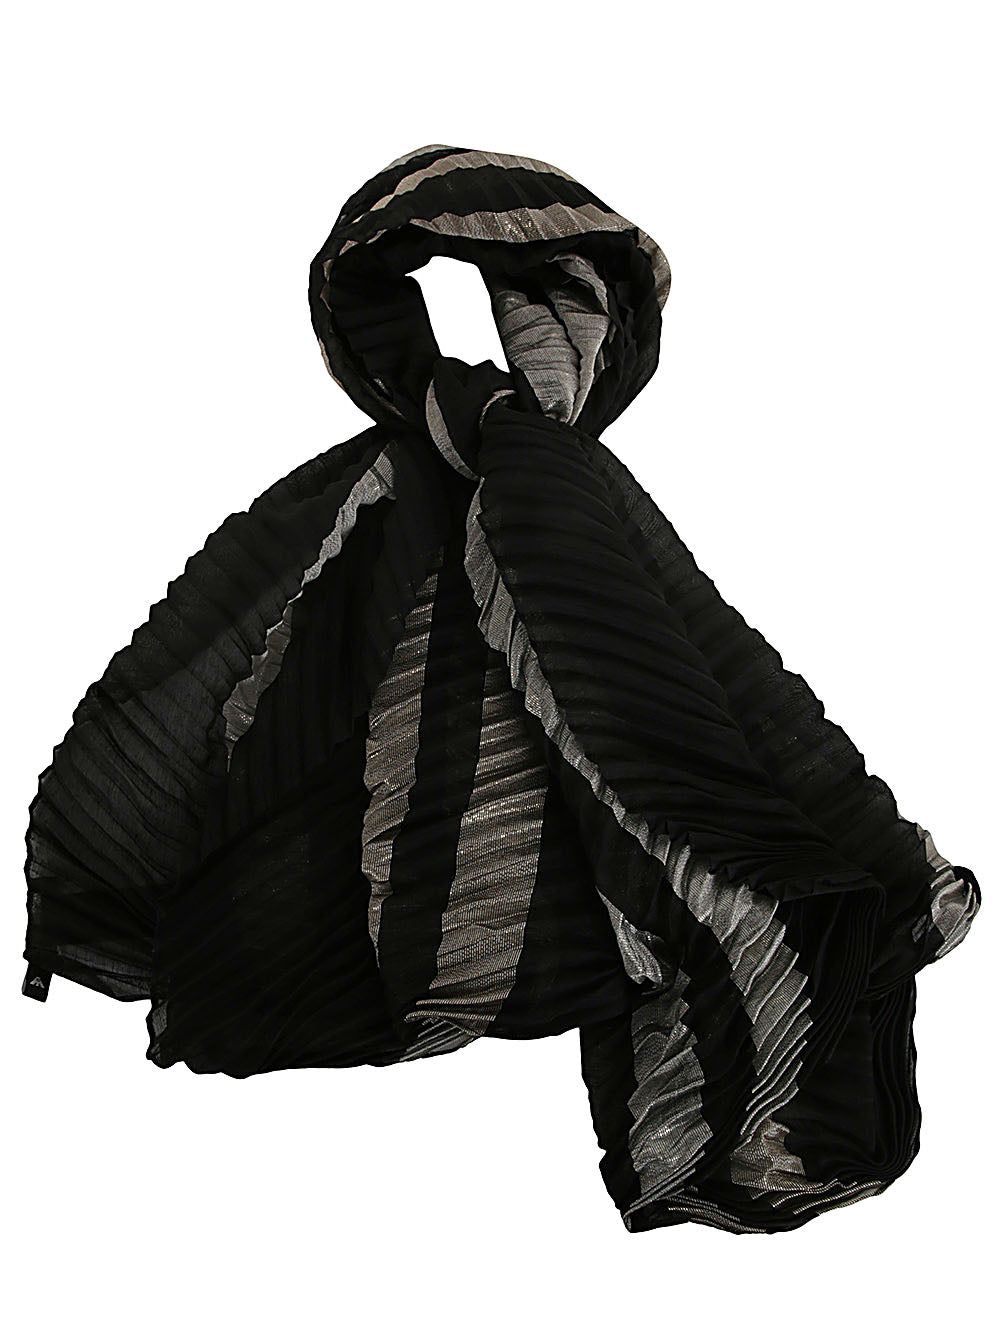 Lady Woven Pleated Stole